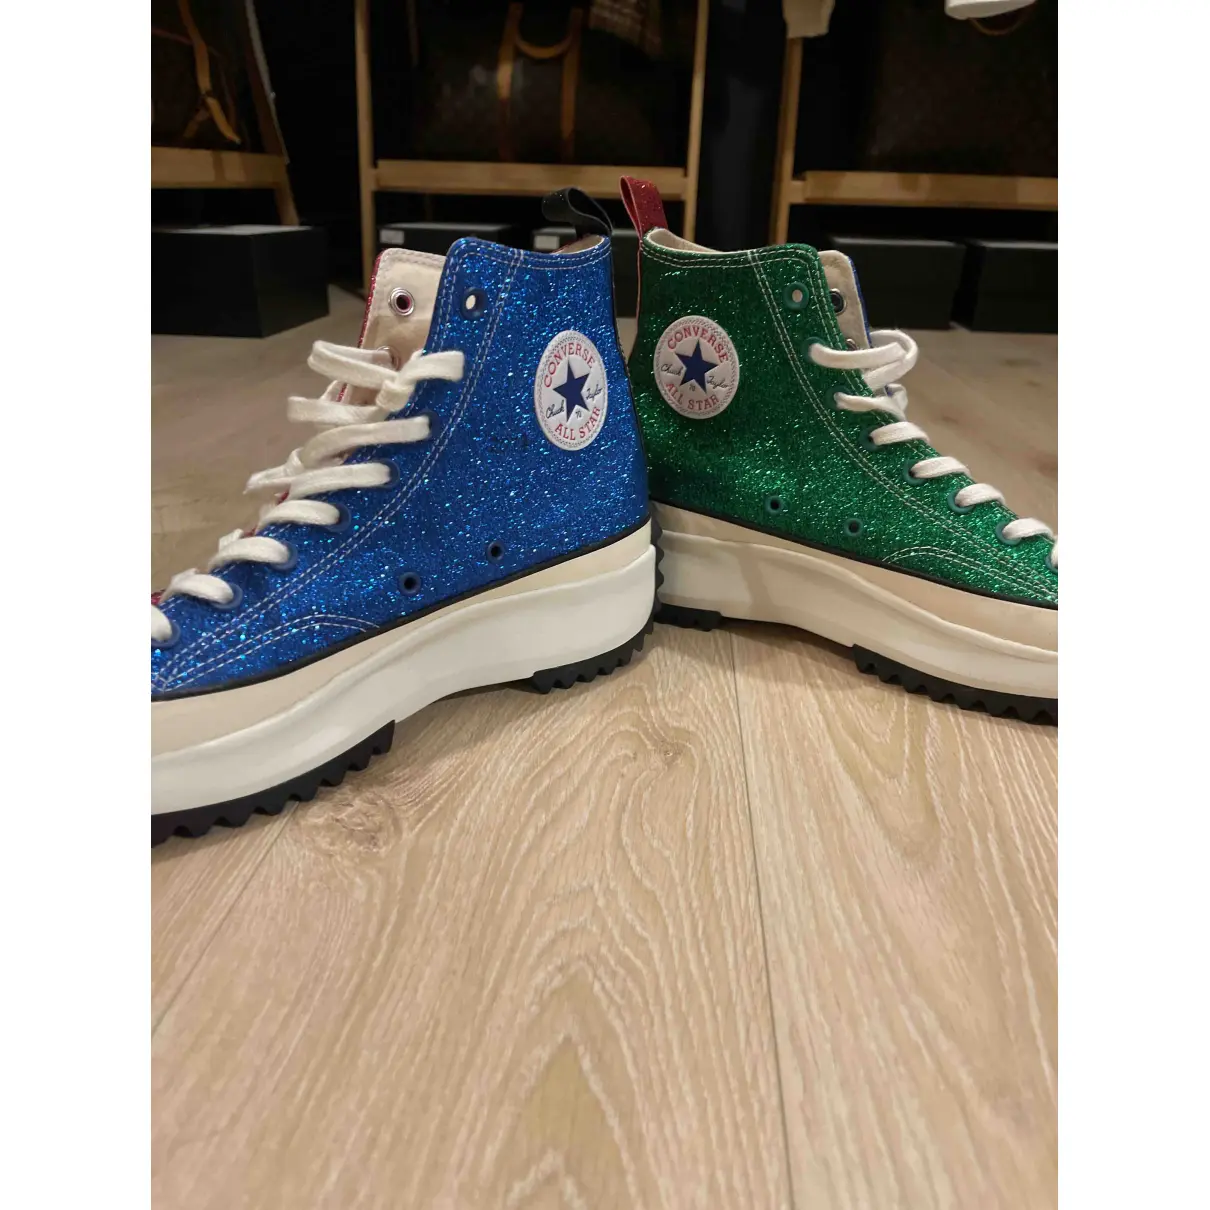 Buy Converse x J.W Anderson Glitter high trainers online